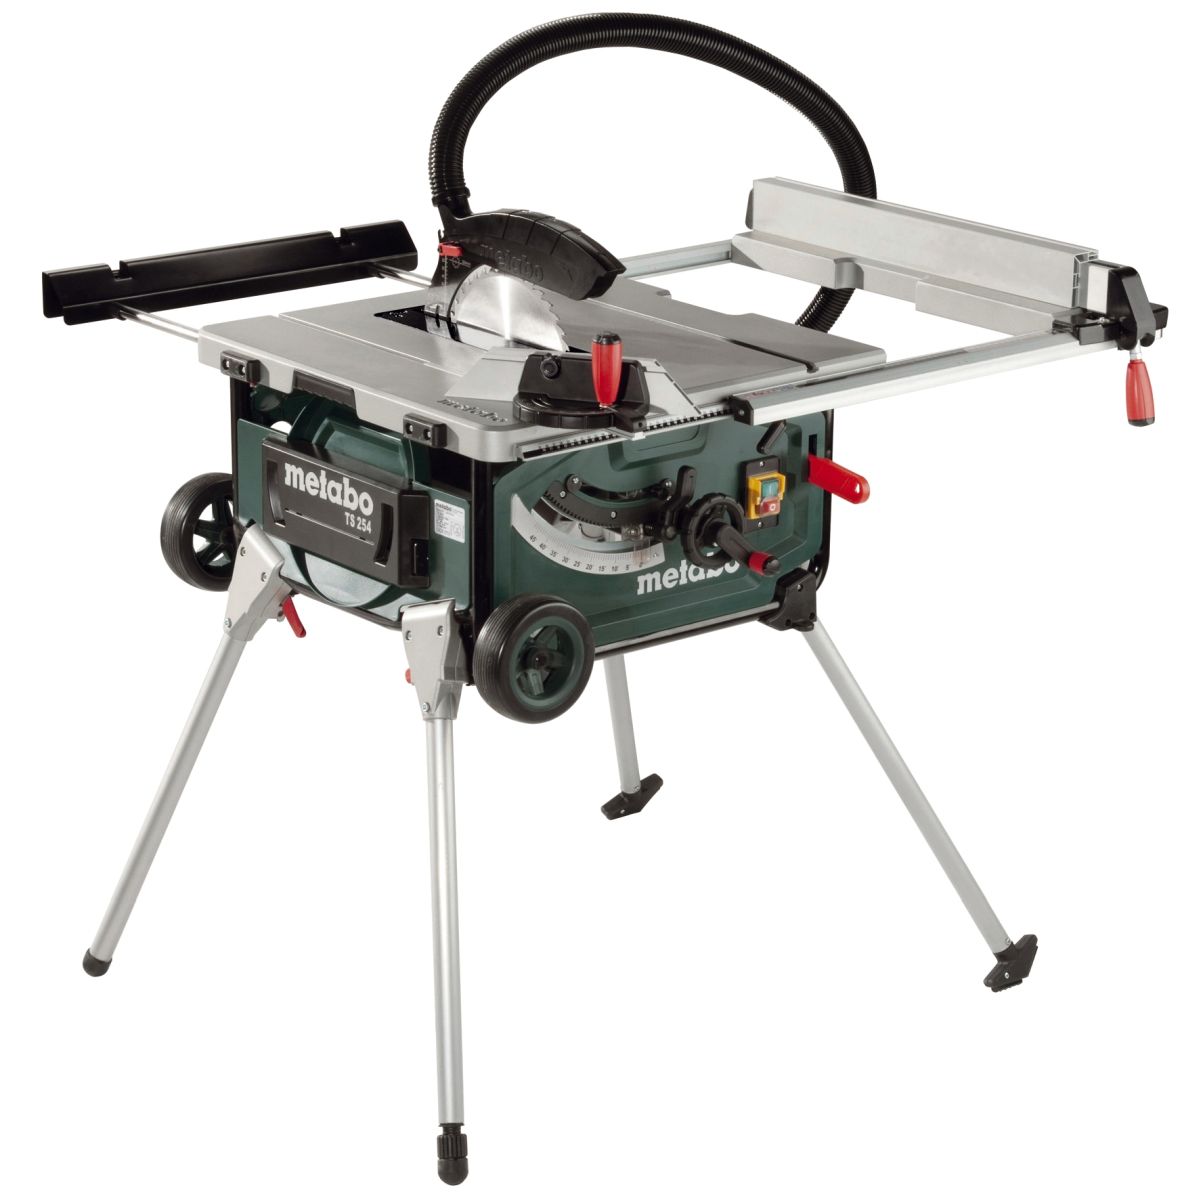 Metabo TS 254 240V, 2KW, 10" Table Saw with Integrated Stand